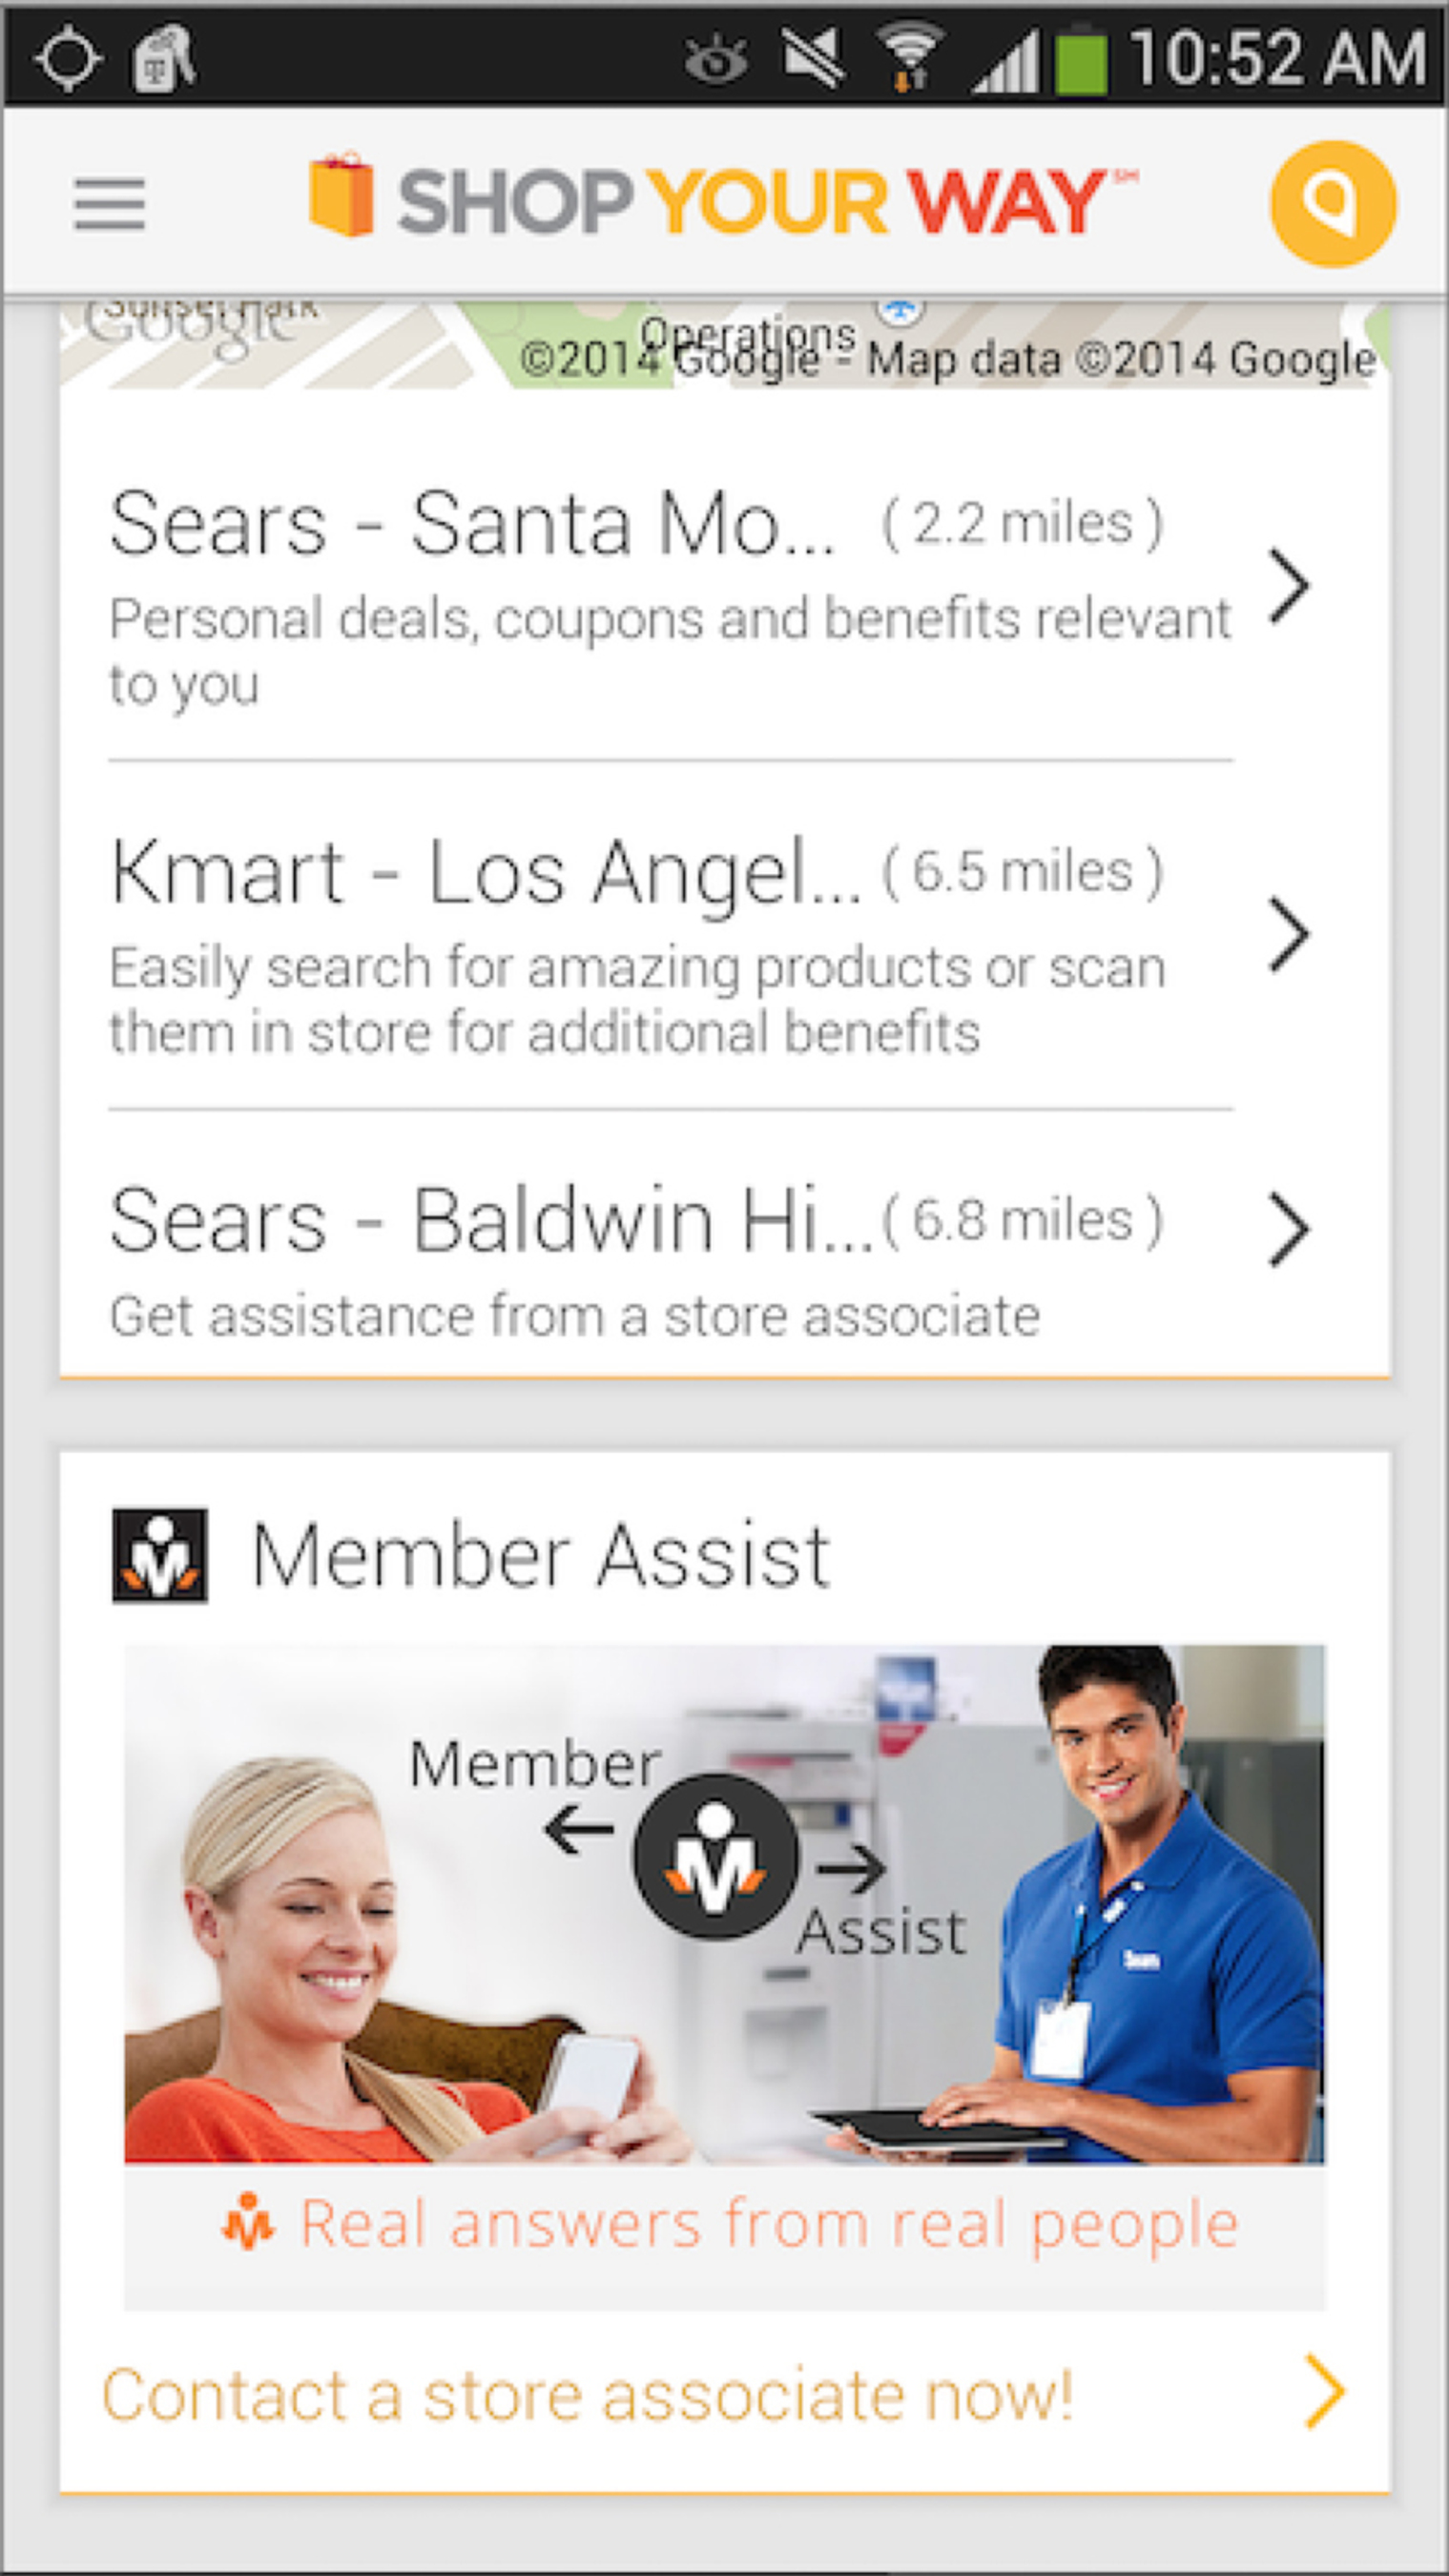 Sears(R) Member Assist tool leverages the online and mobile channels that members use to easily tap into the expertise of Sears' nationwide team of knowledgeable store associates, as well as members of the Shop Your Way community, to get advice on products and services important to them. (PRNewsFoto/ Sears Holdings Corporation )